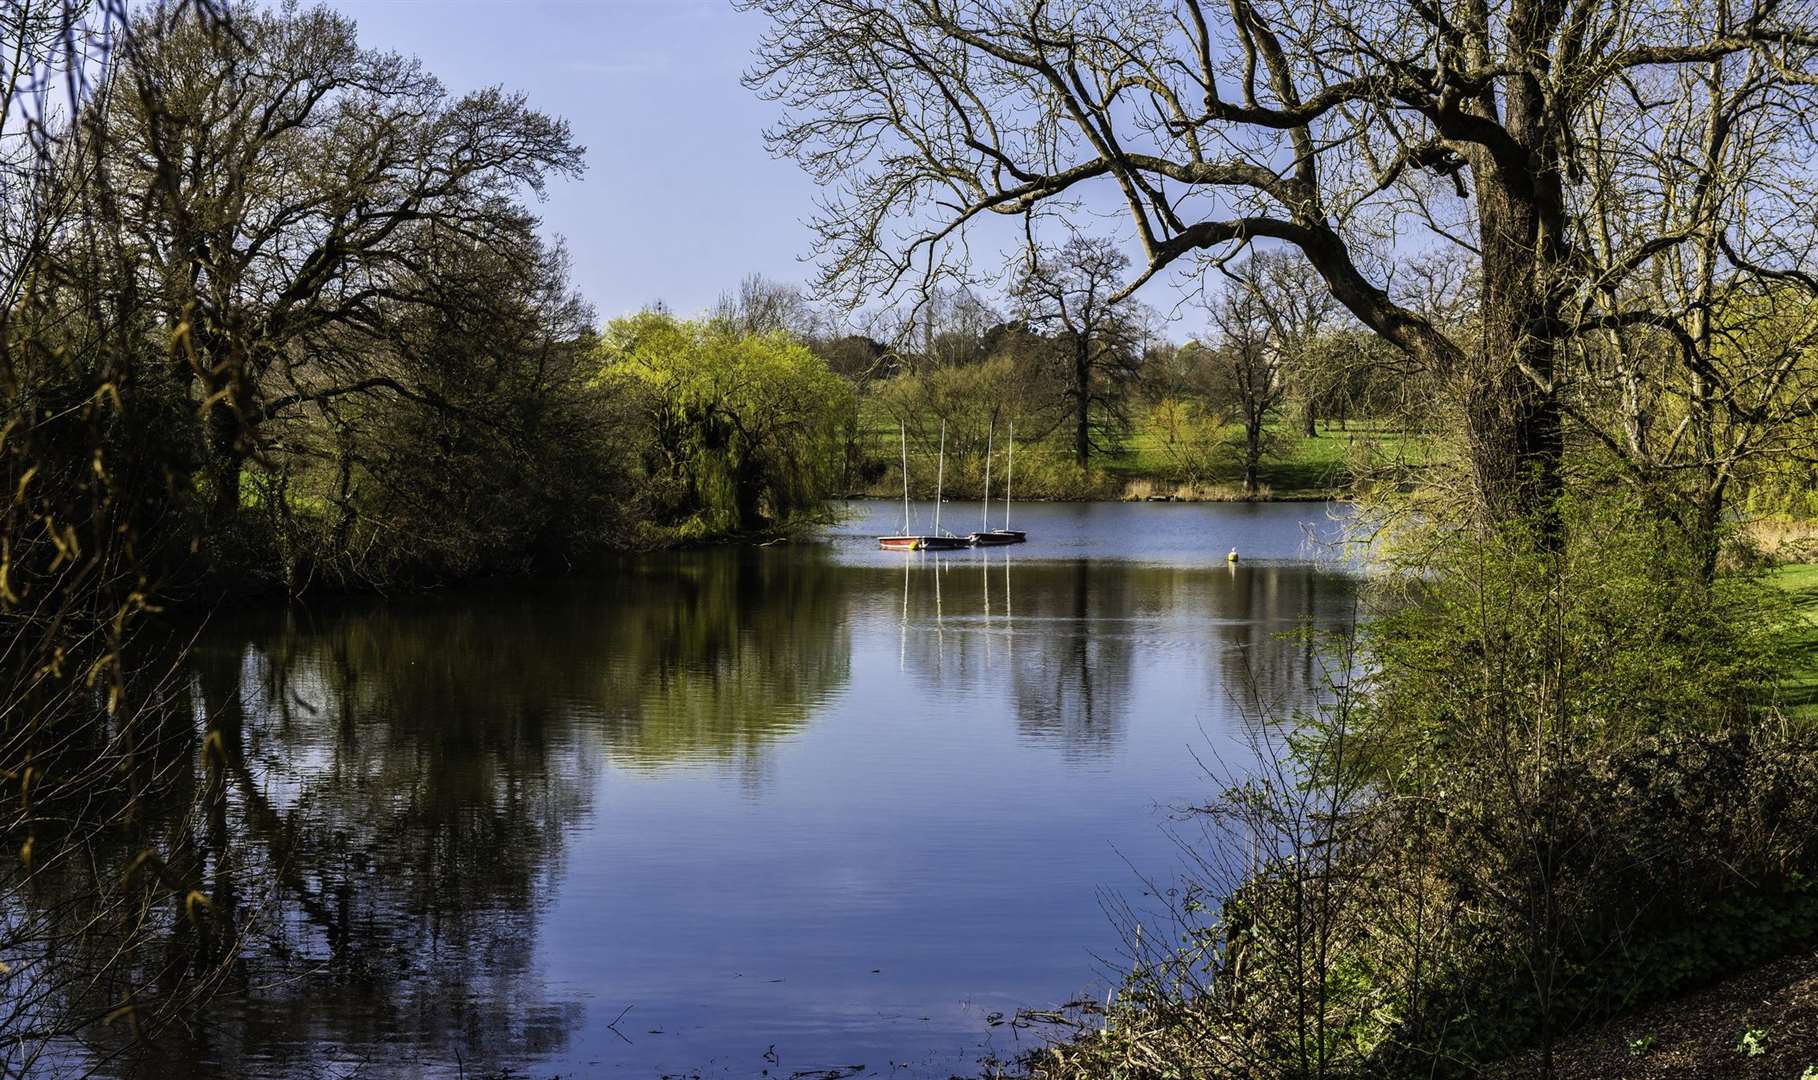 Learn about the history of Mote Park in Maidstone